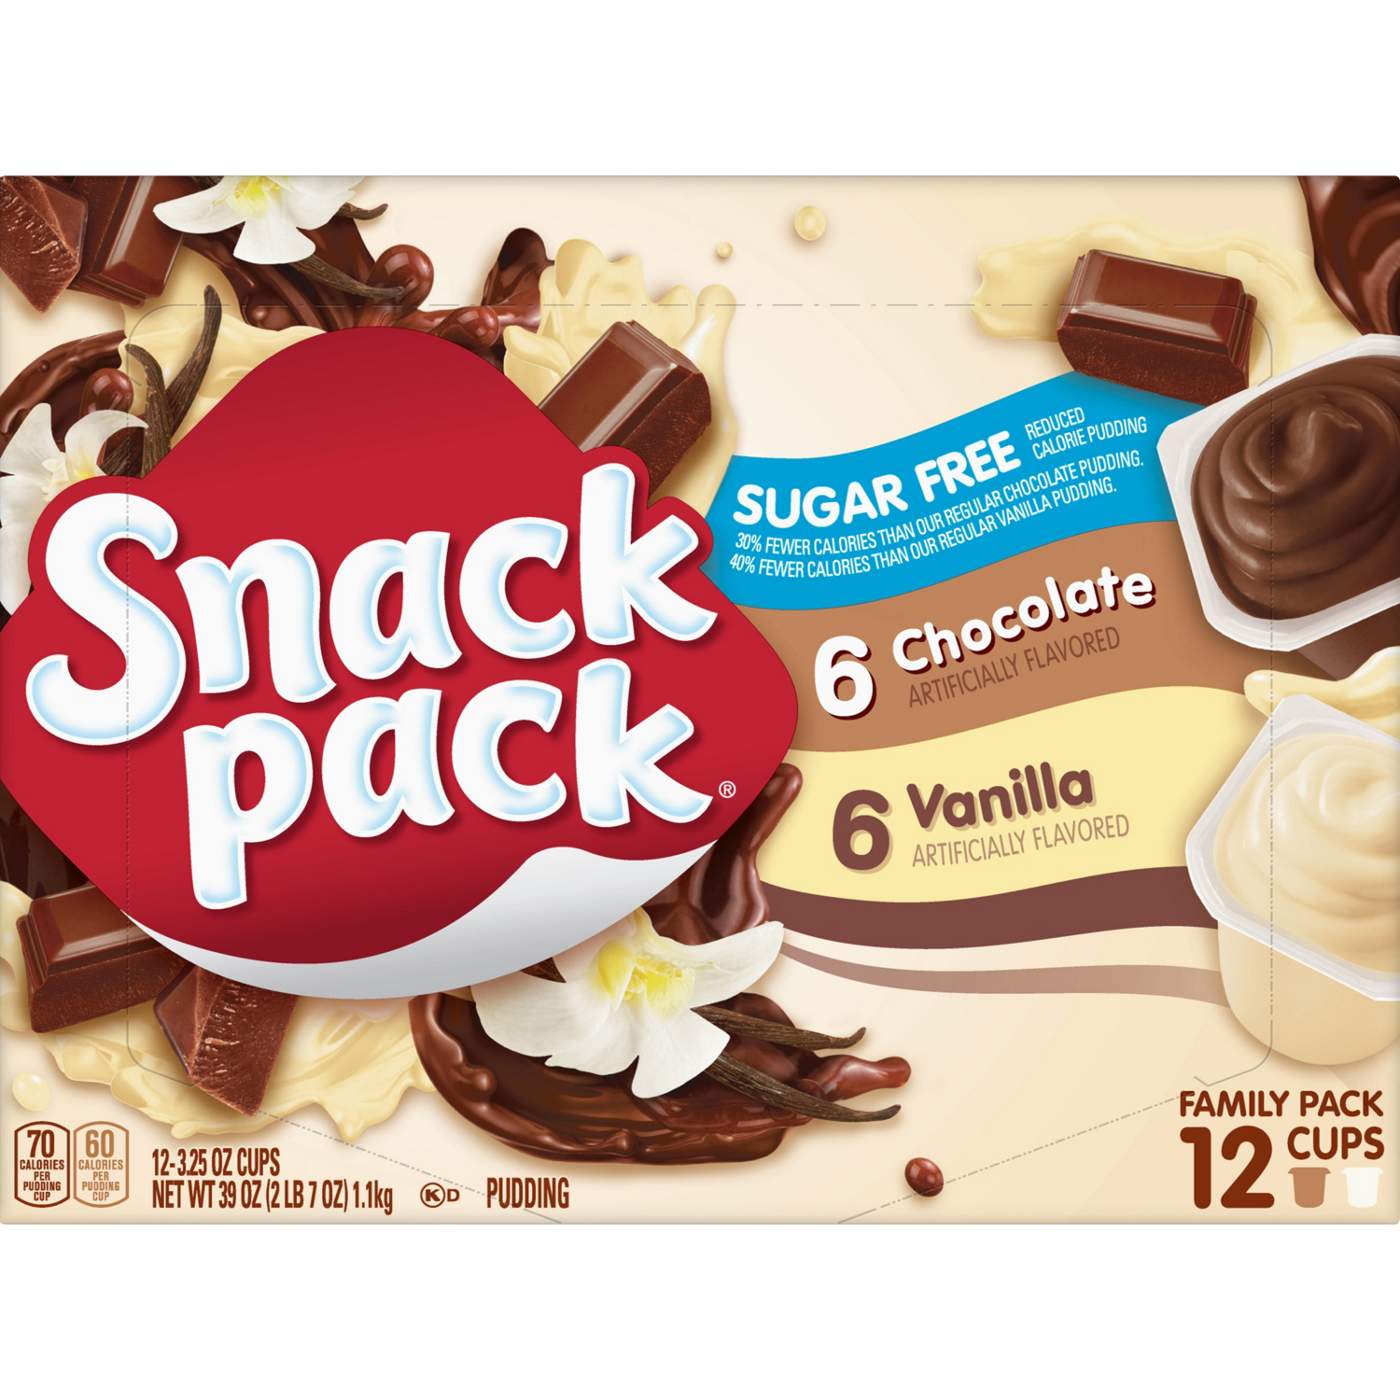 Snack Pack Sugar Free Chocolate & Vanilla Pudding Cups Family Pack; image 4 of 7